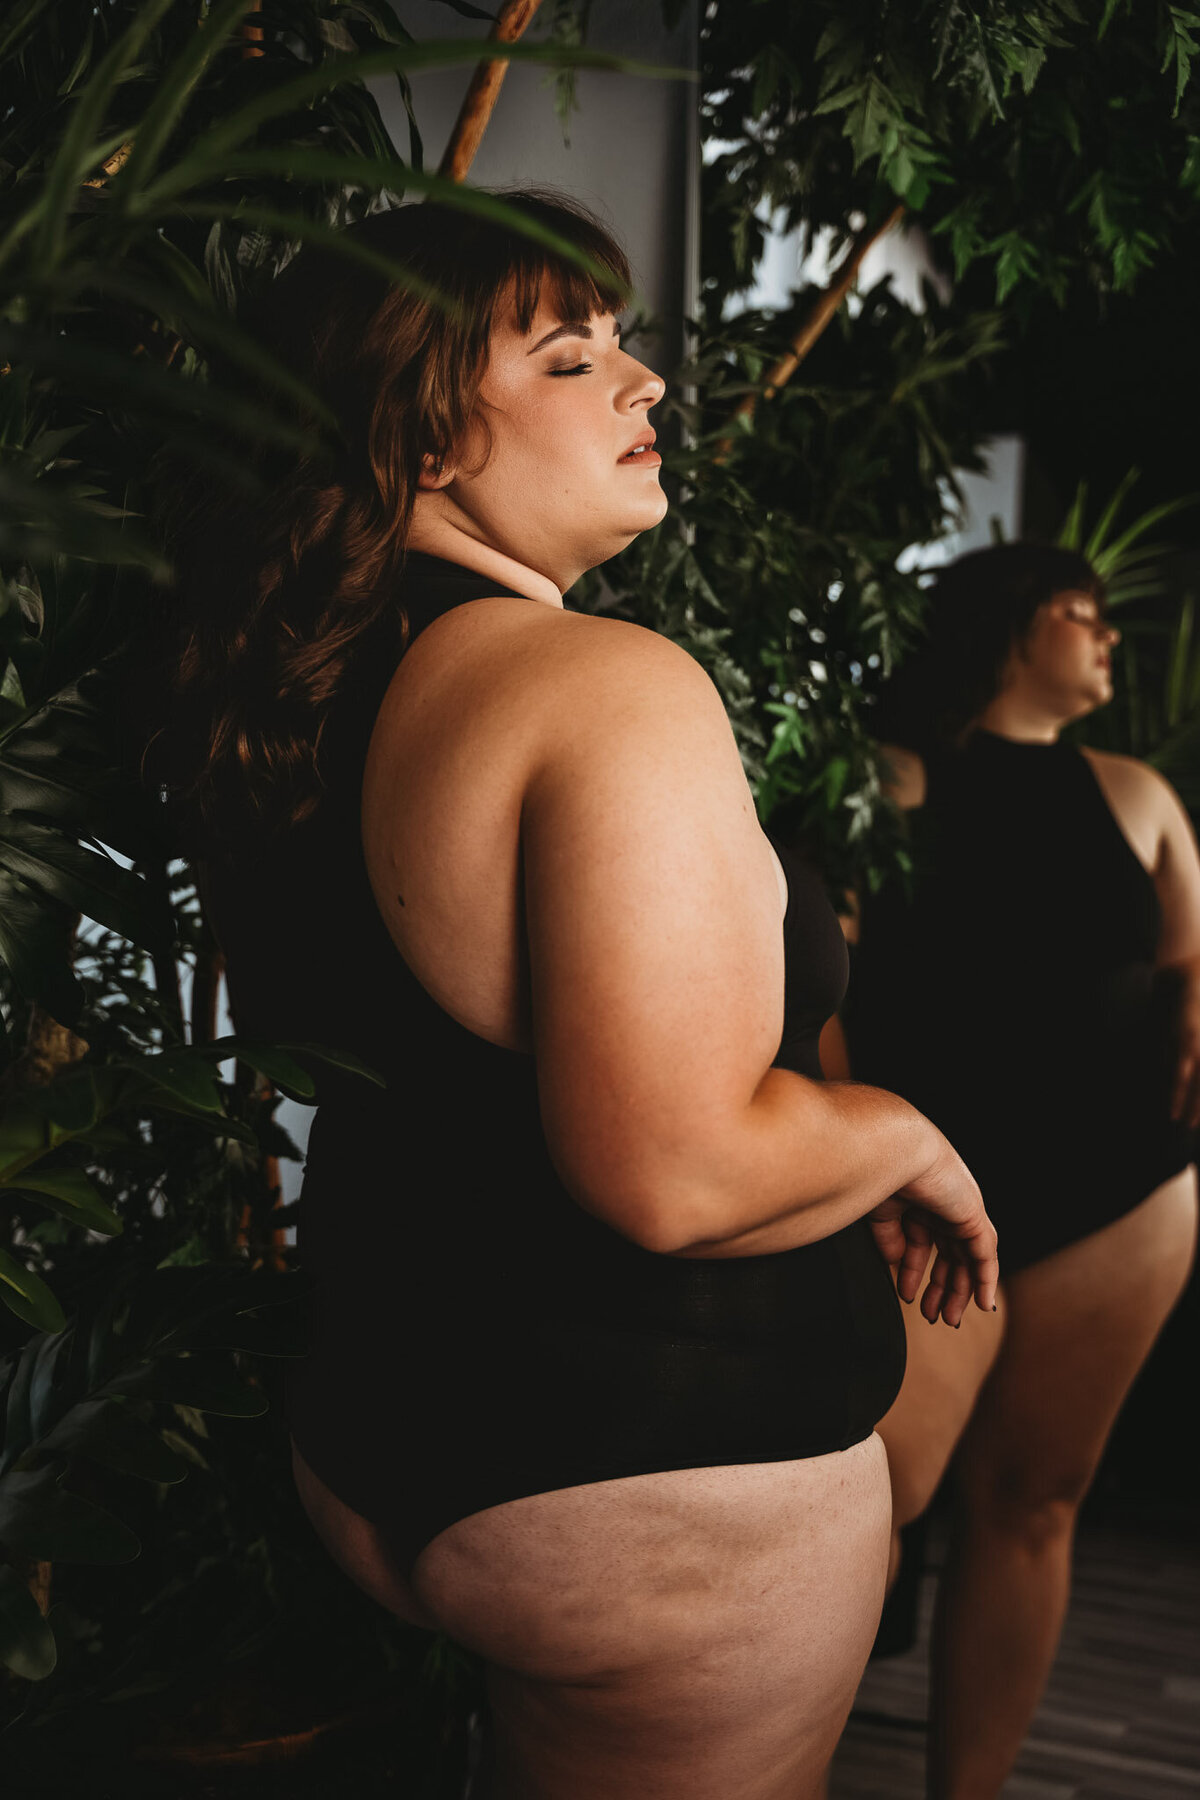 beautiful plus size brunette woman wearing a black body suit, standing beside greenery plants and in front of a mirror